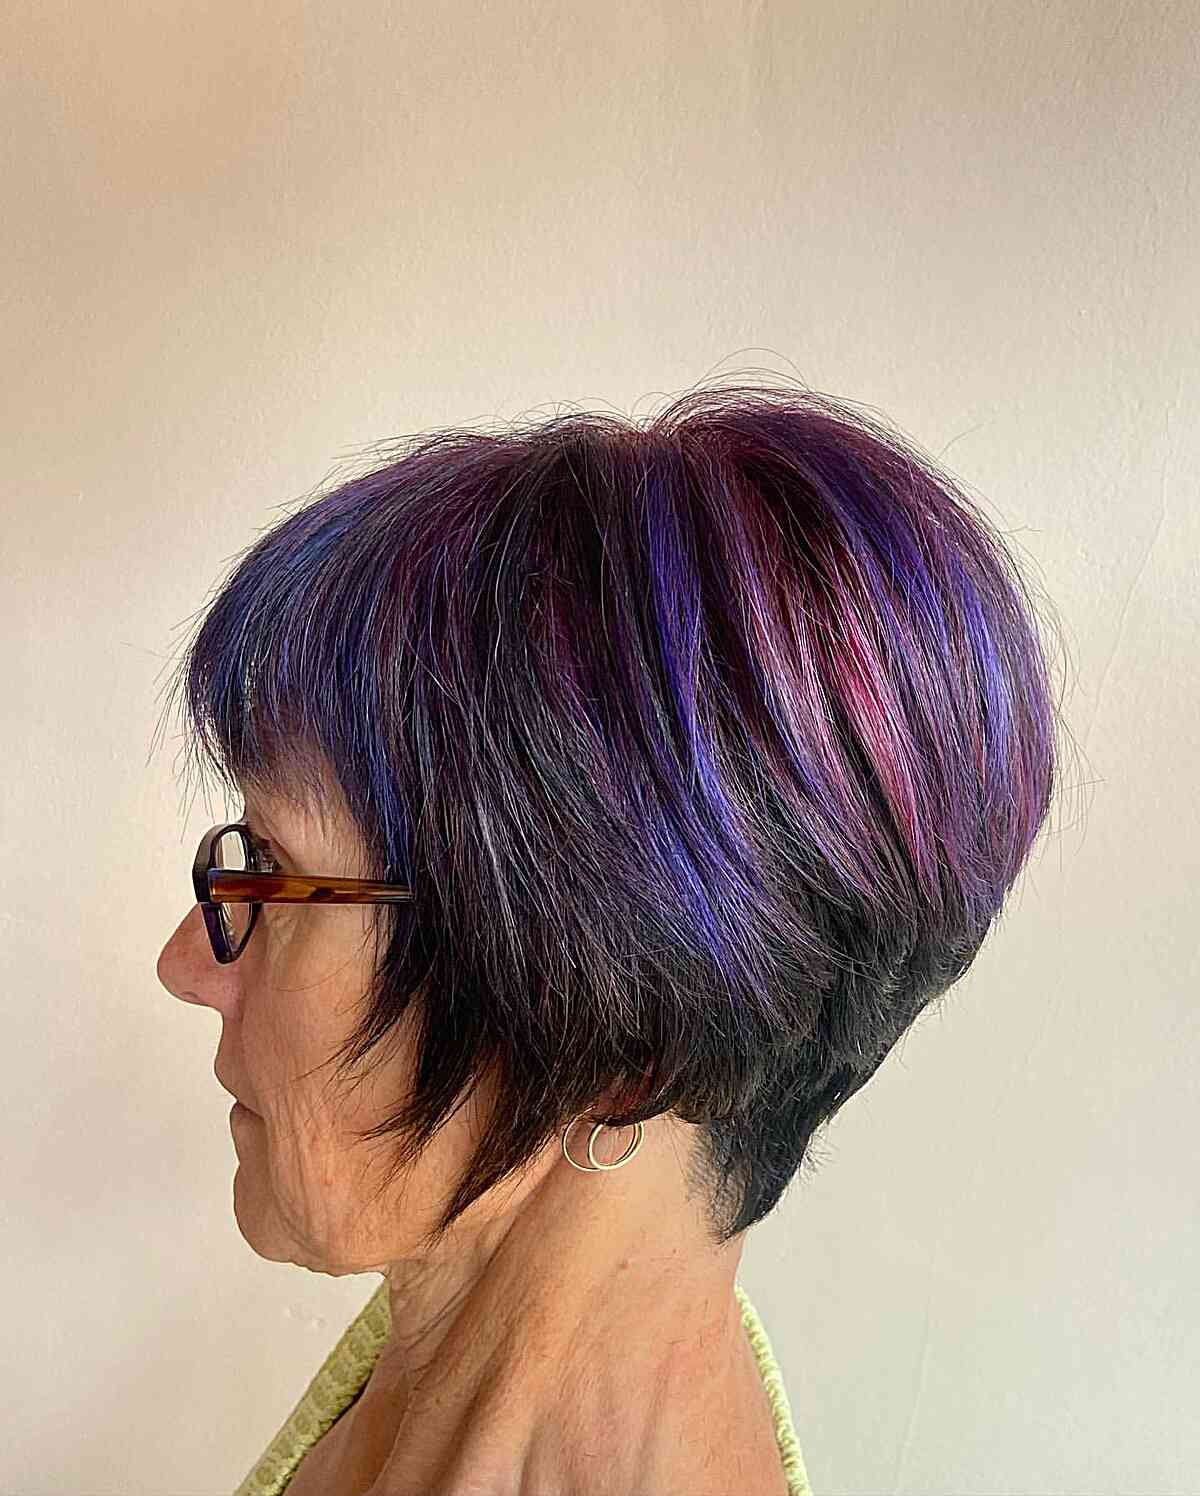 Short Wedge Haircut with Pink and Violet Highlights for Ladies passed their 60s